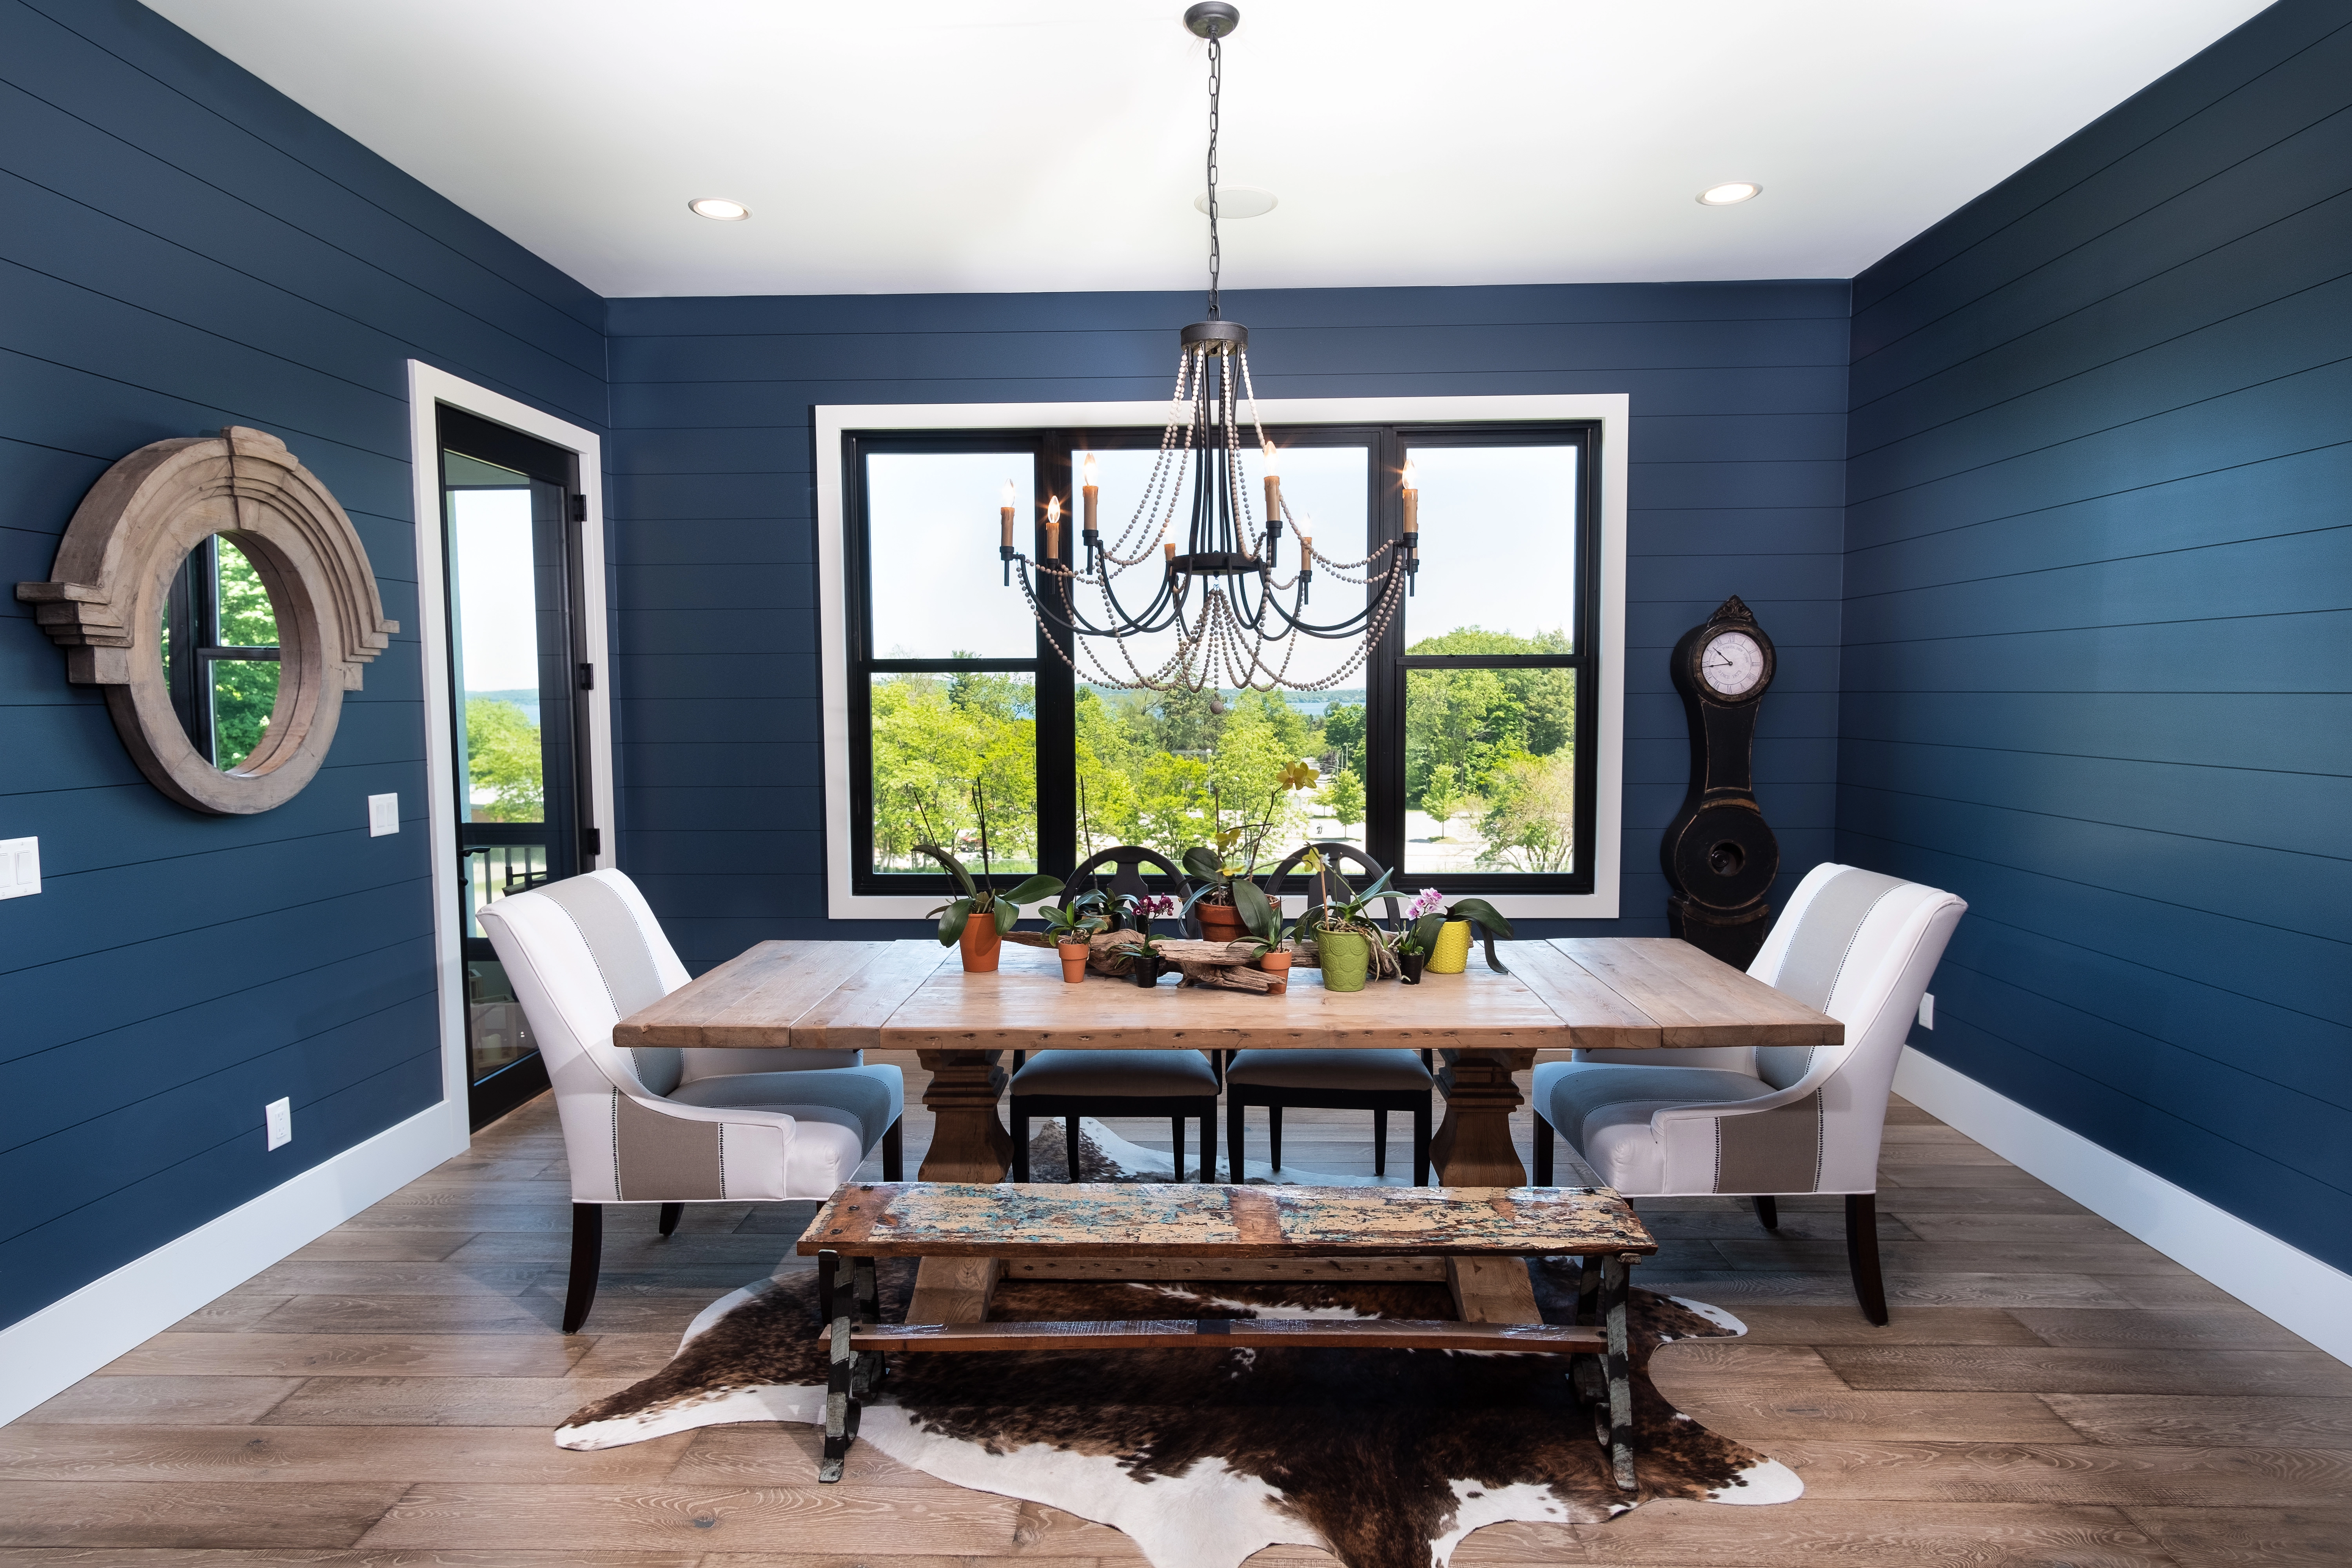 Formal dining room with table and chairs. Walls are a dark blue.